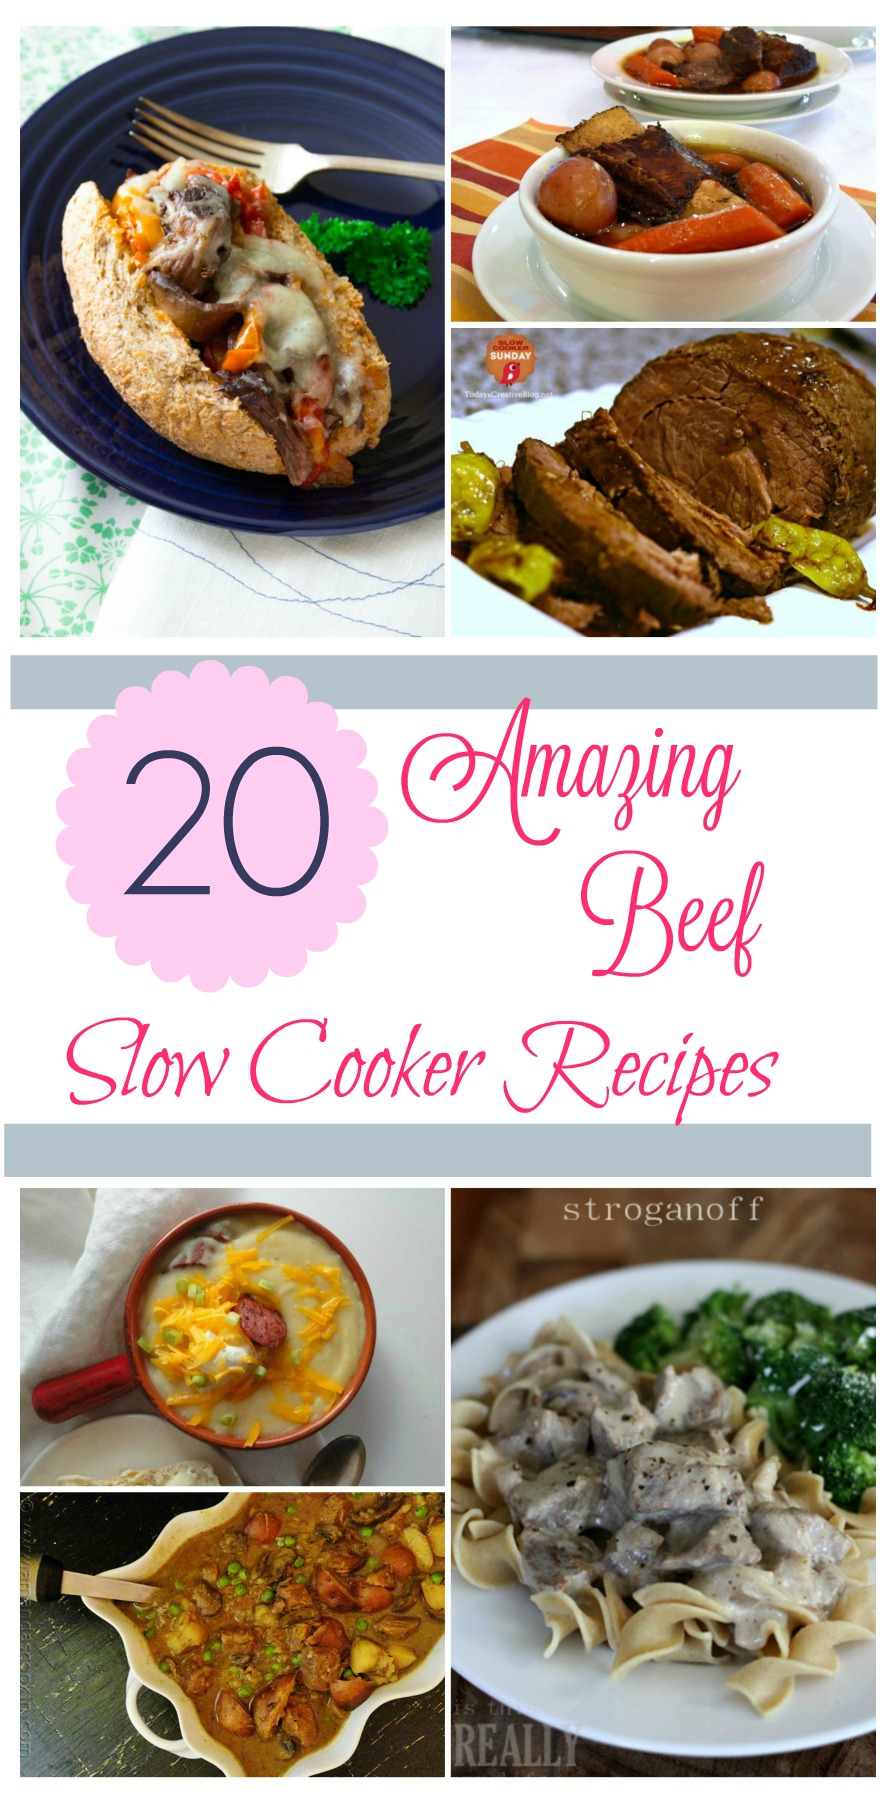 Looking for delicious beef recipes for your slow cooker? Check out these 20 Amazing Beef Slow Cooker Recipes that are perfect for any family!